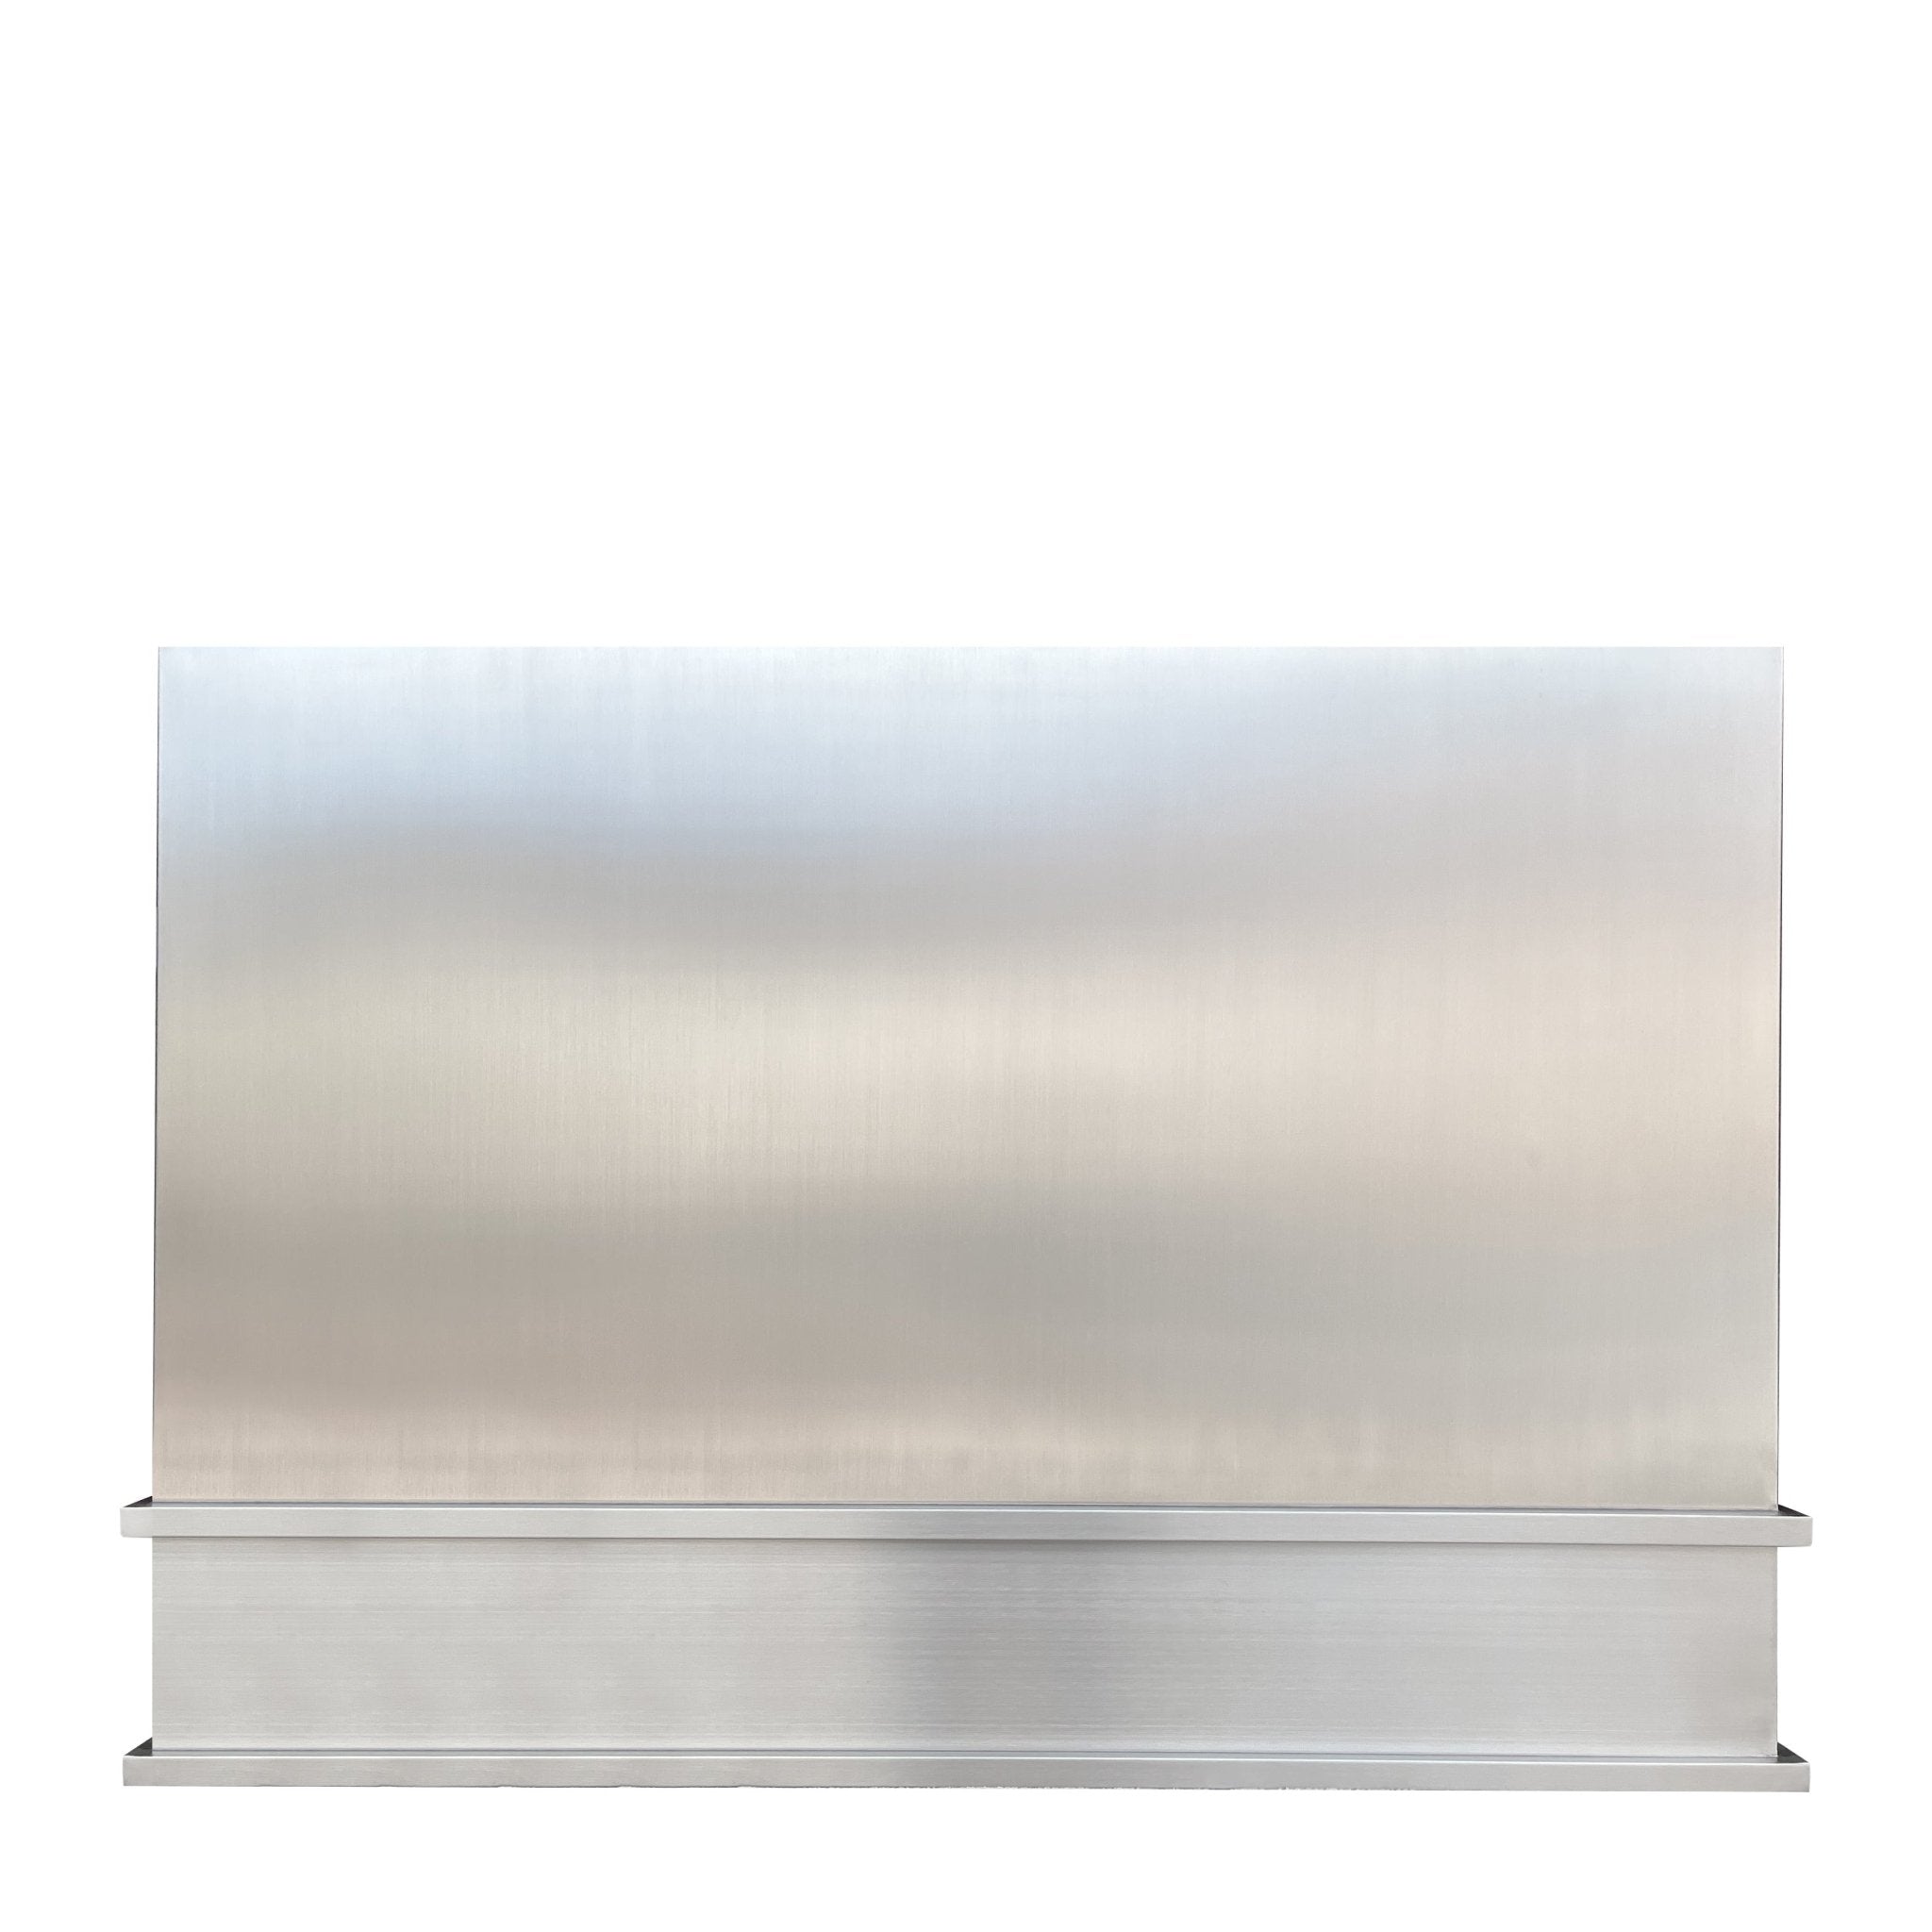 SINDA Handcrafted Bell Shaped Stainless Steel Vent Hood SRH1-DB2TR